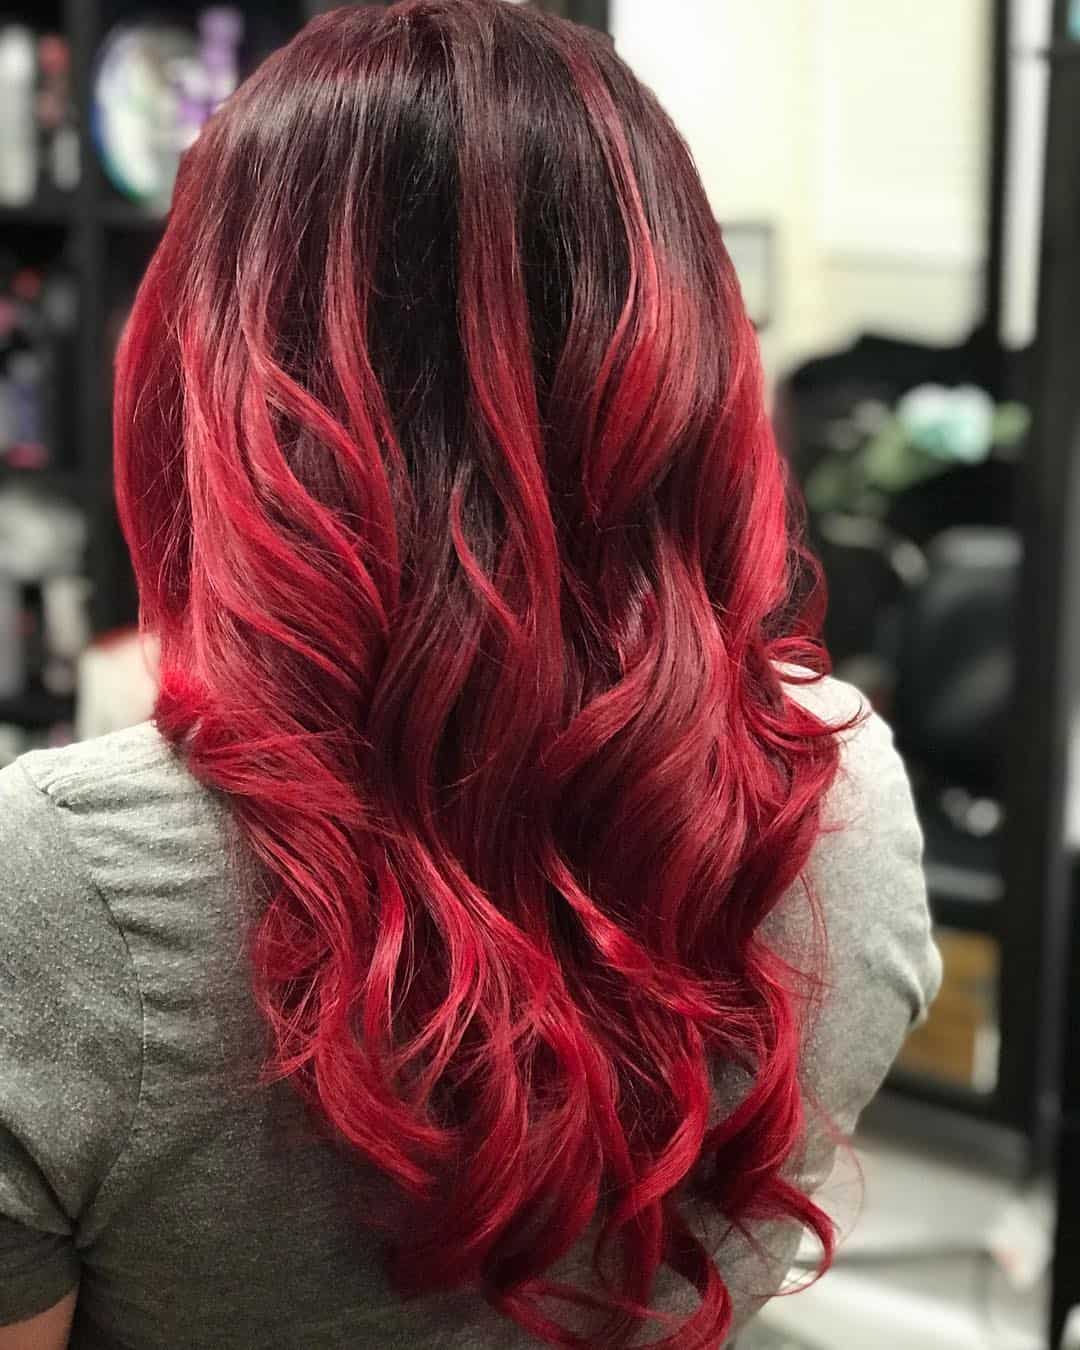 Dark Hair With Bright Red Highlights All About The Gloss